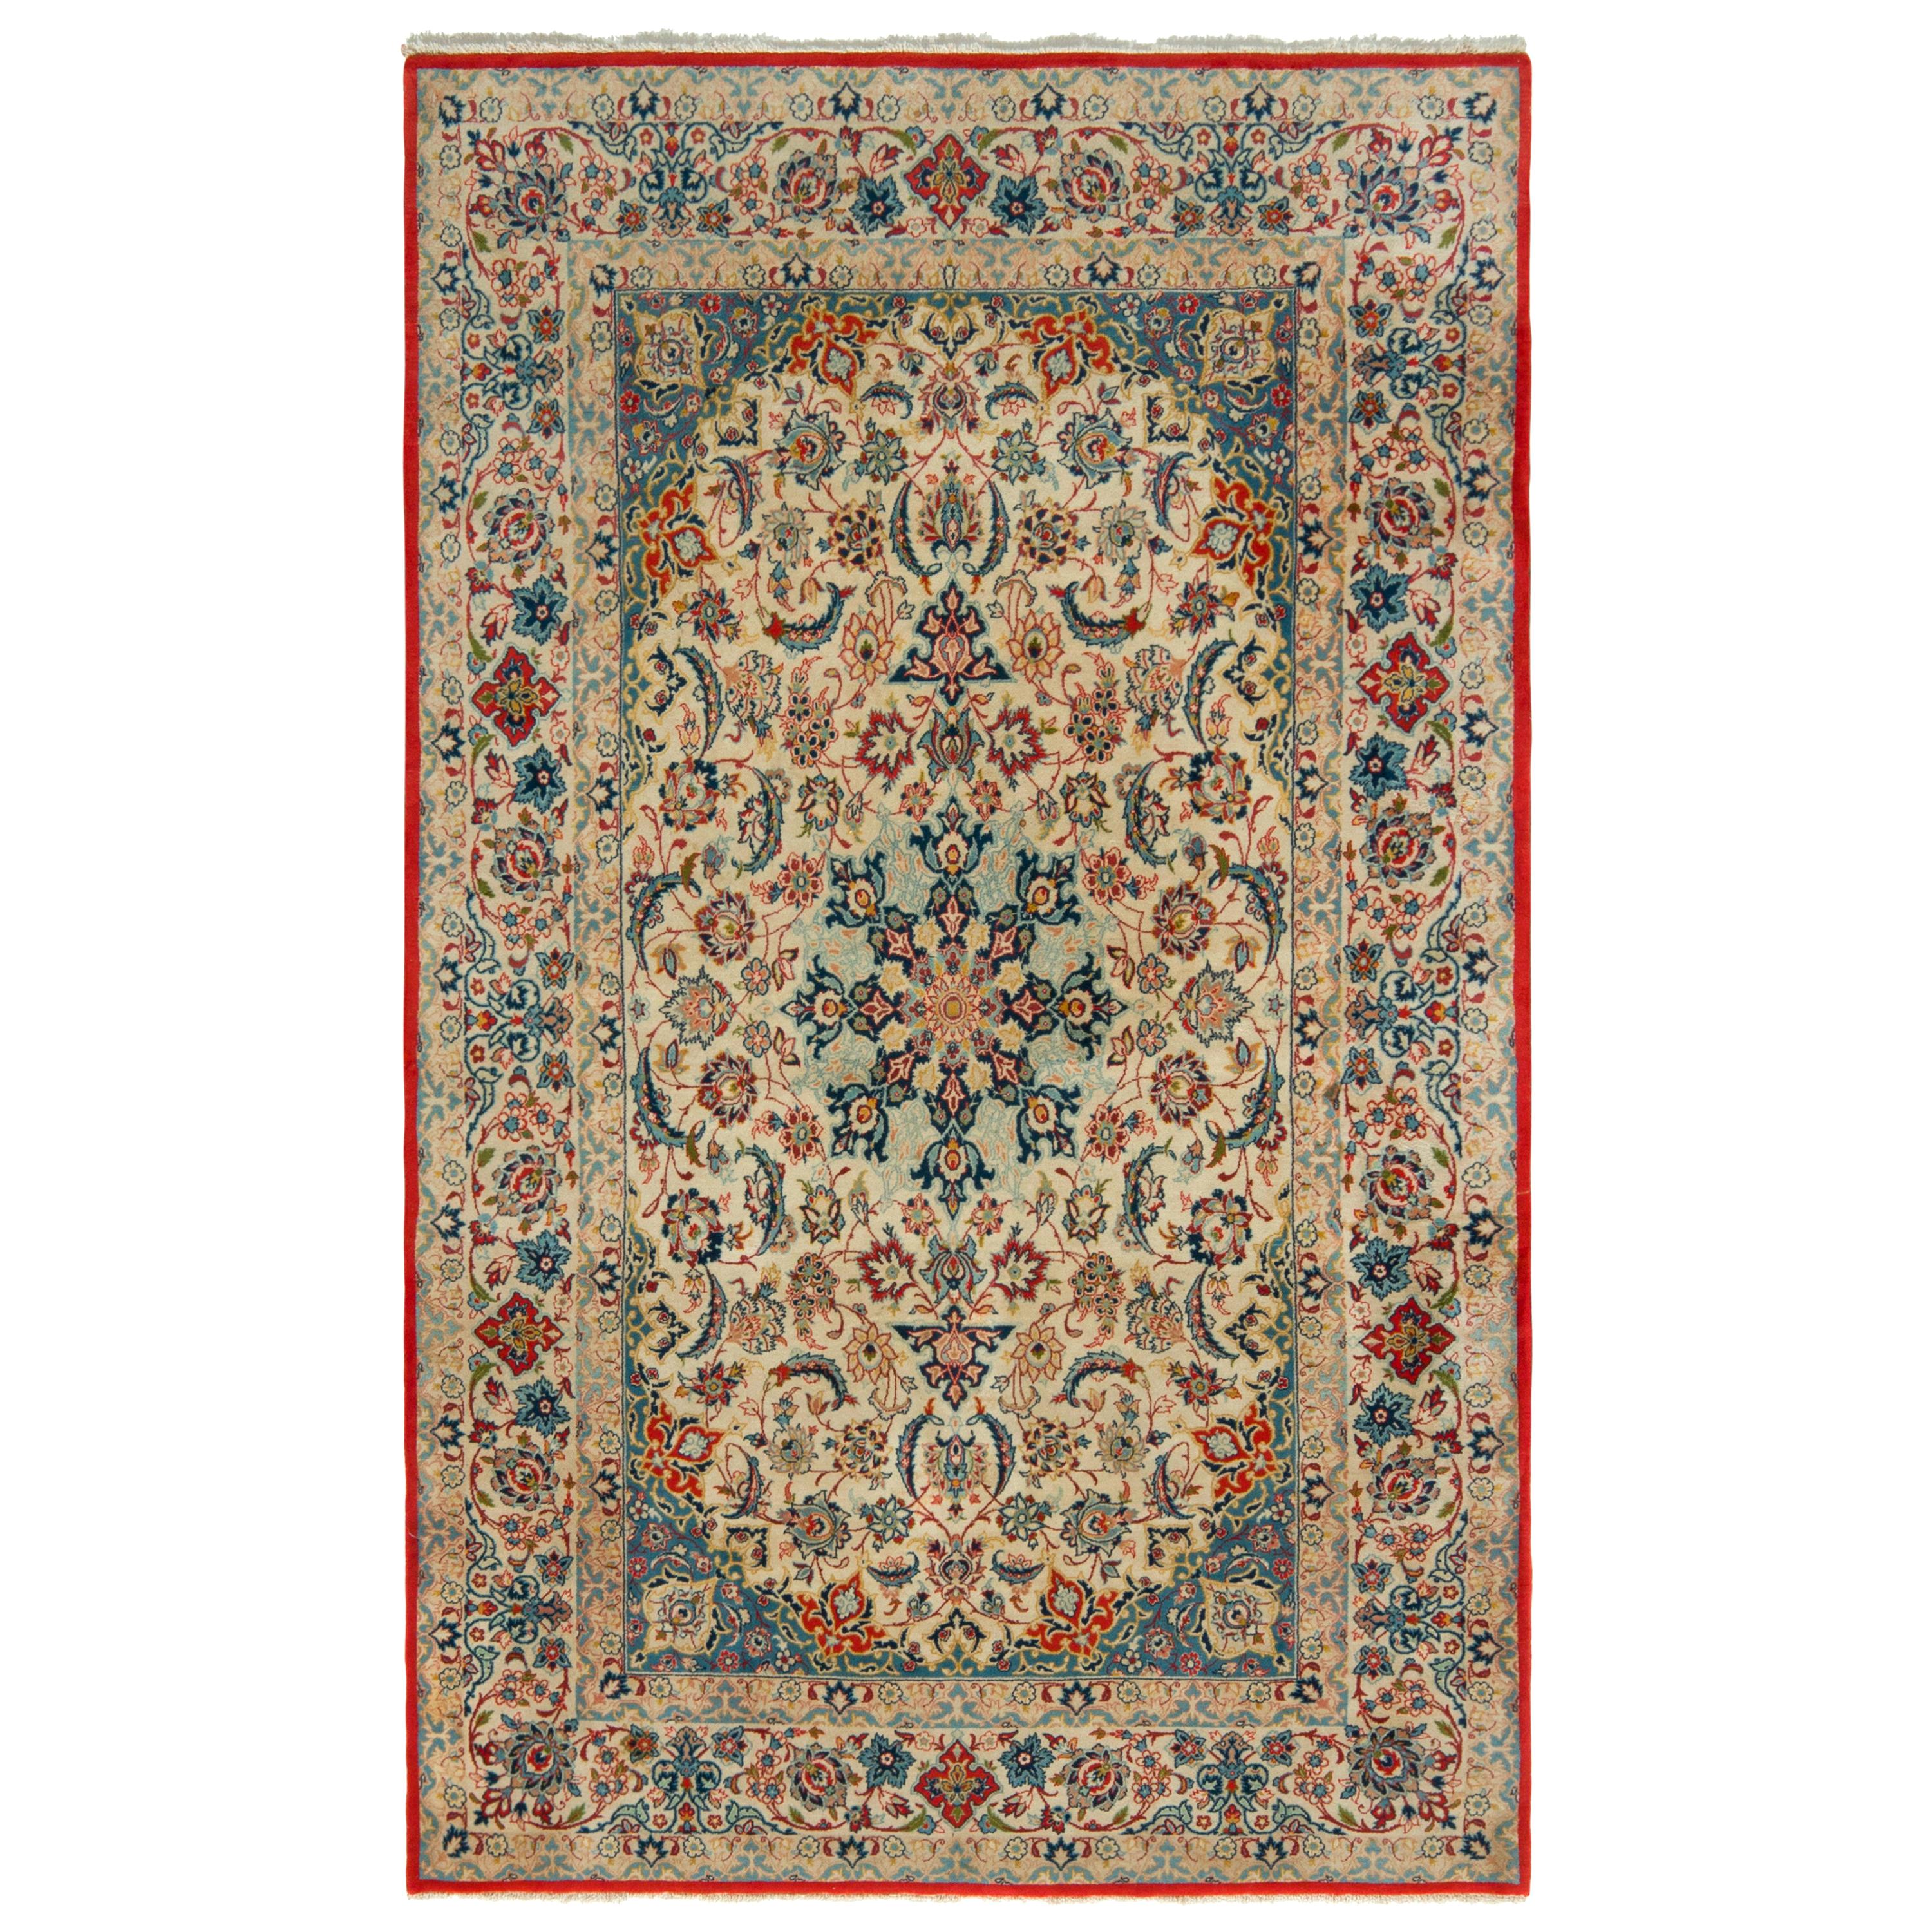 Vintage Isfahan Rug in Beige Blue and Red Persian Floral Pattern by Rug & Kilim